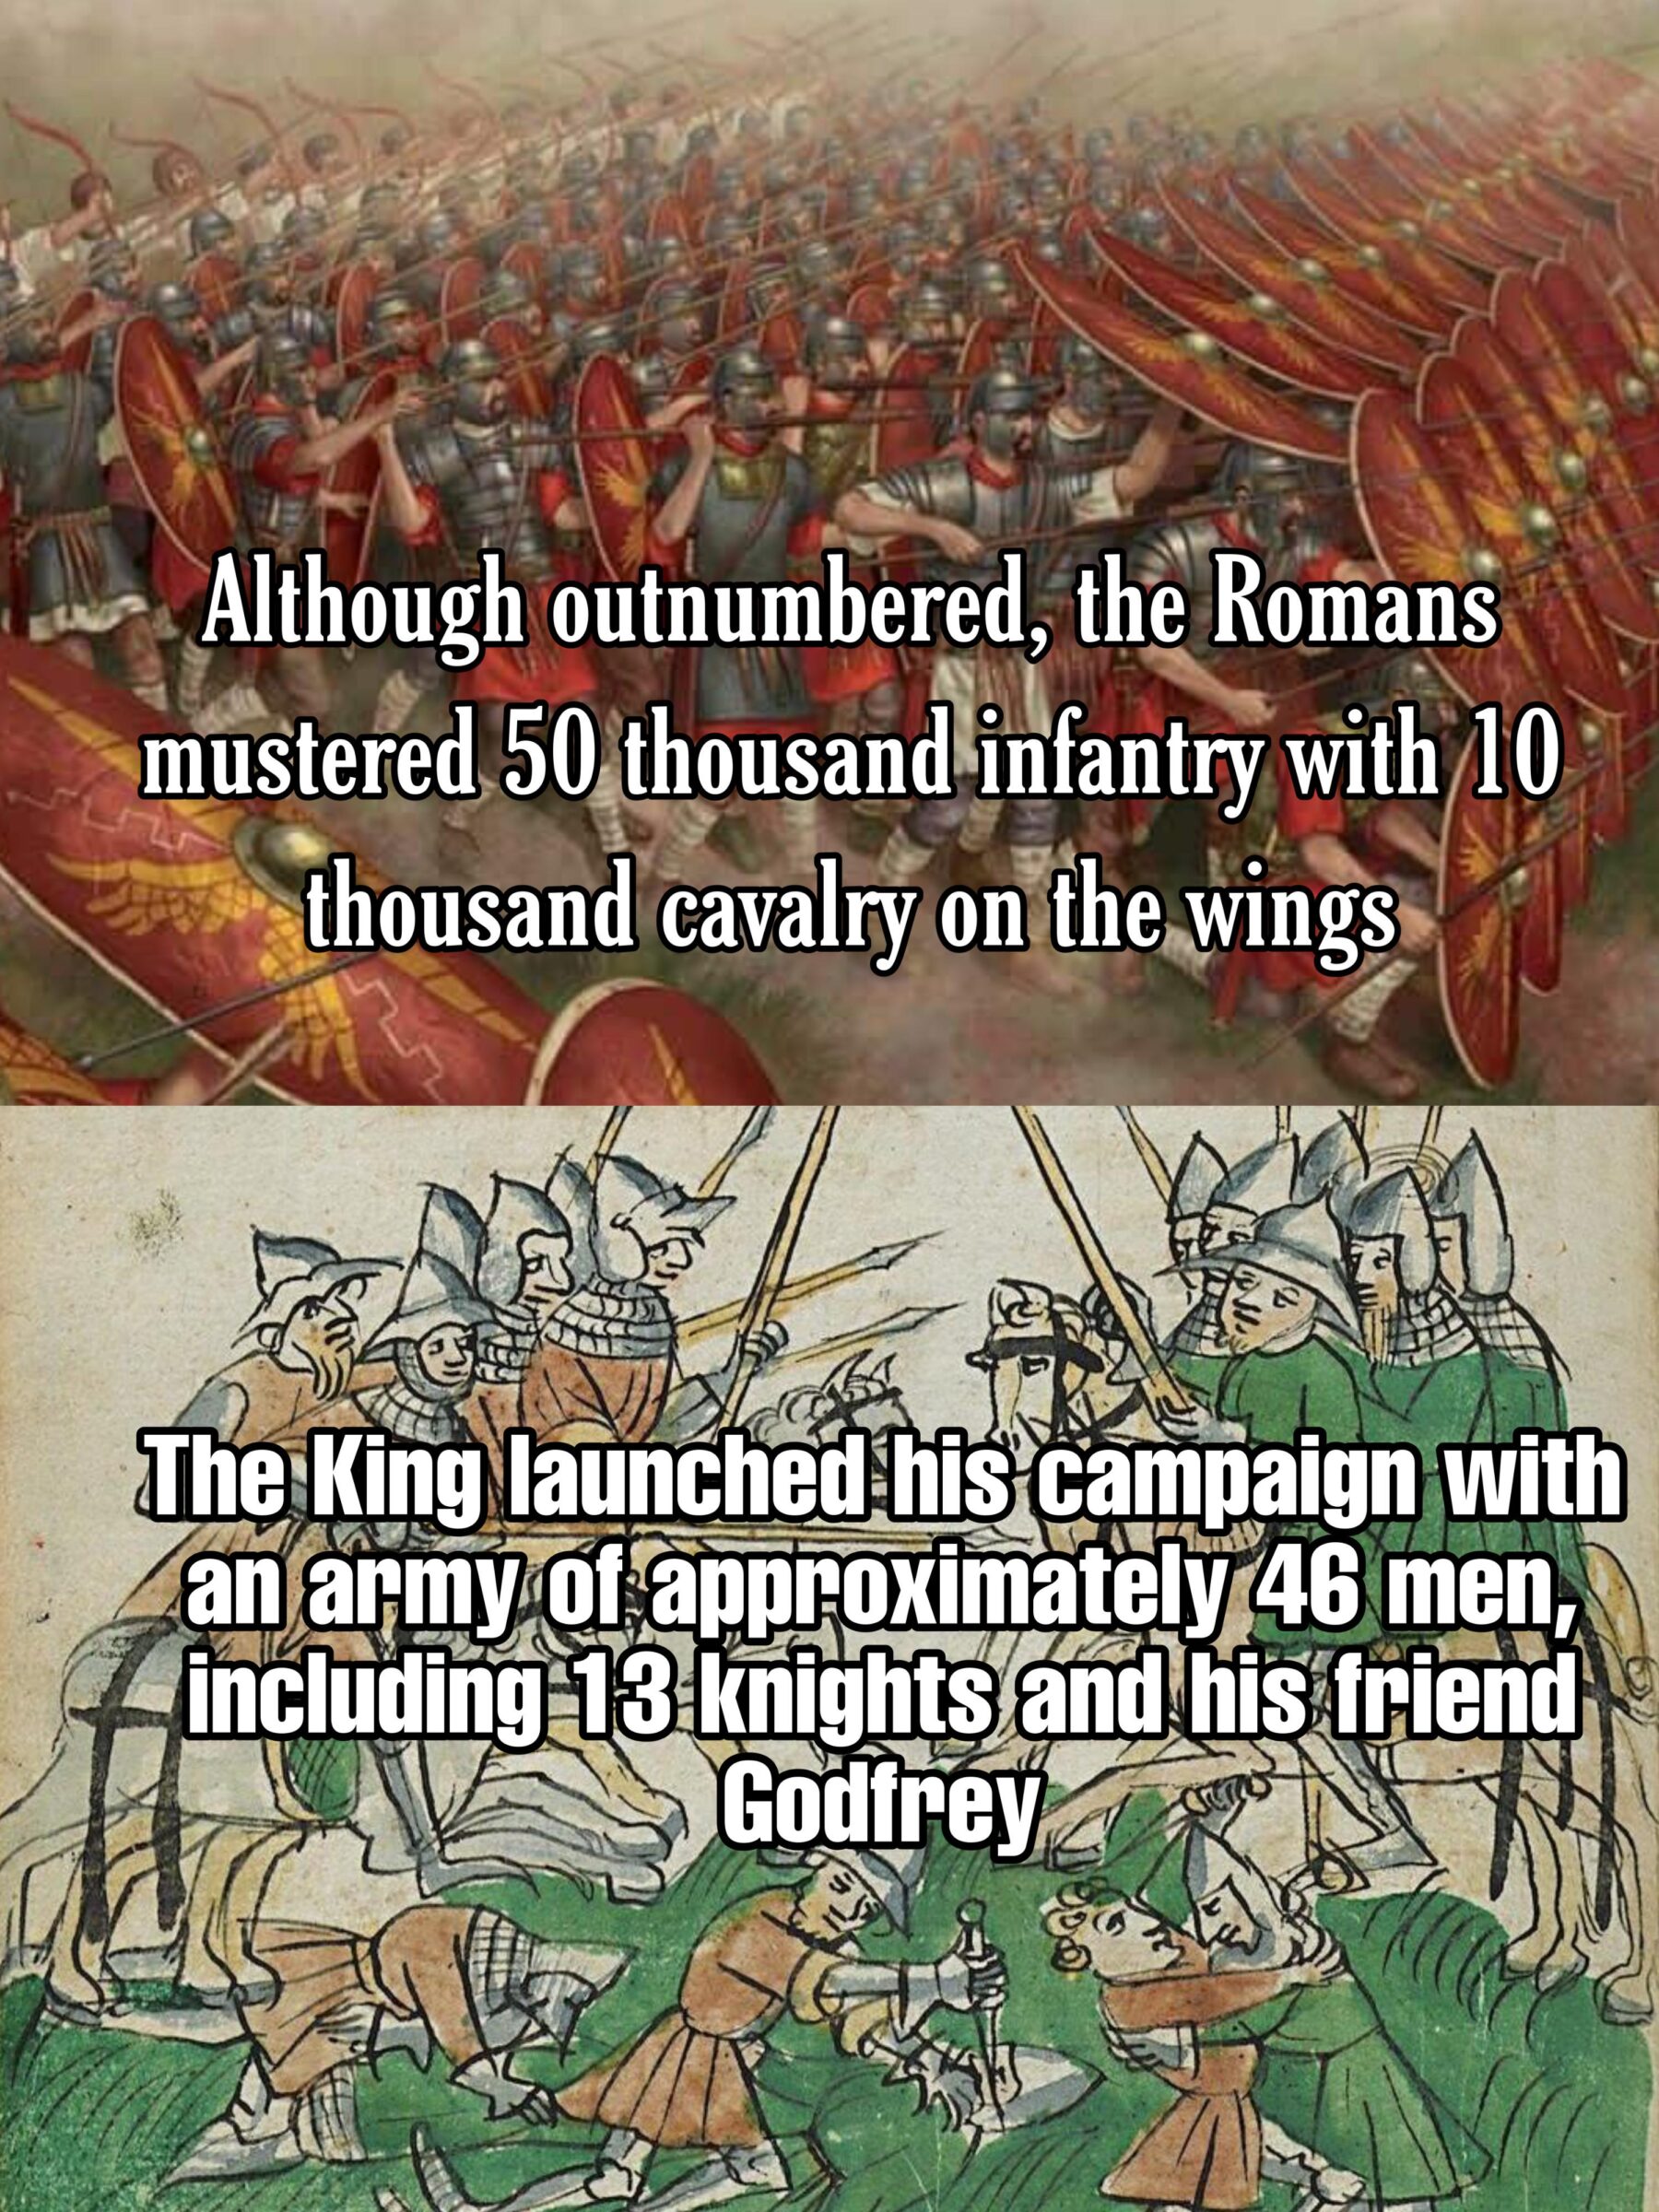 History, Romans, Rome, Roman, Godfrey, Vietnam History Memes History, Romans, Rome, Roman, Godfrey, Vietnam text: Although outnumbered, the Romans 'Lustered 50&ousand infantry with 10 4thousand cavalryuthetyings Thed(ing including-I agnightsj%ndßlis frien! Godfrey 4 